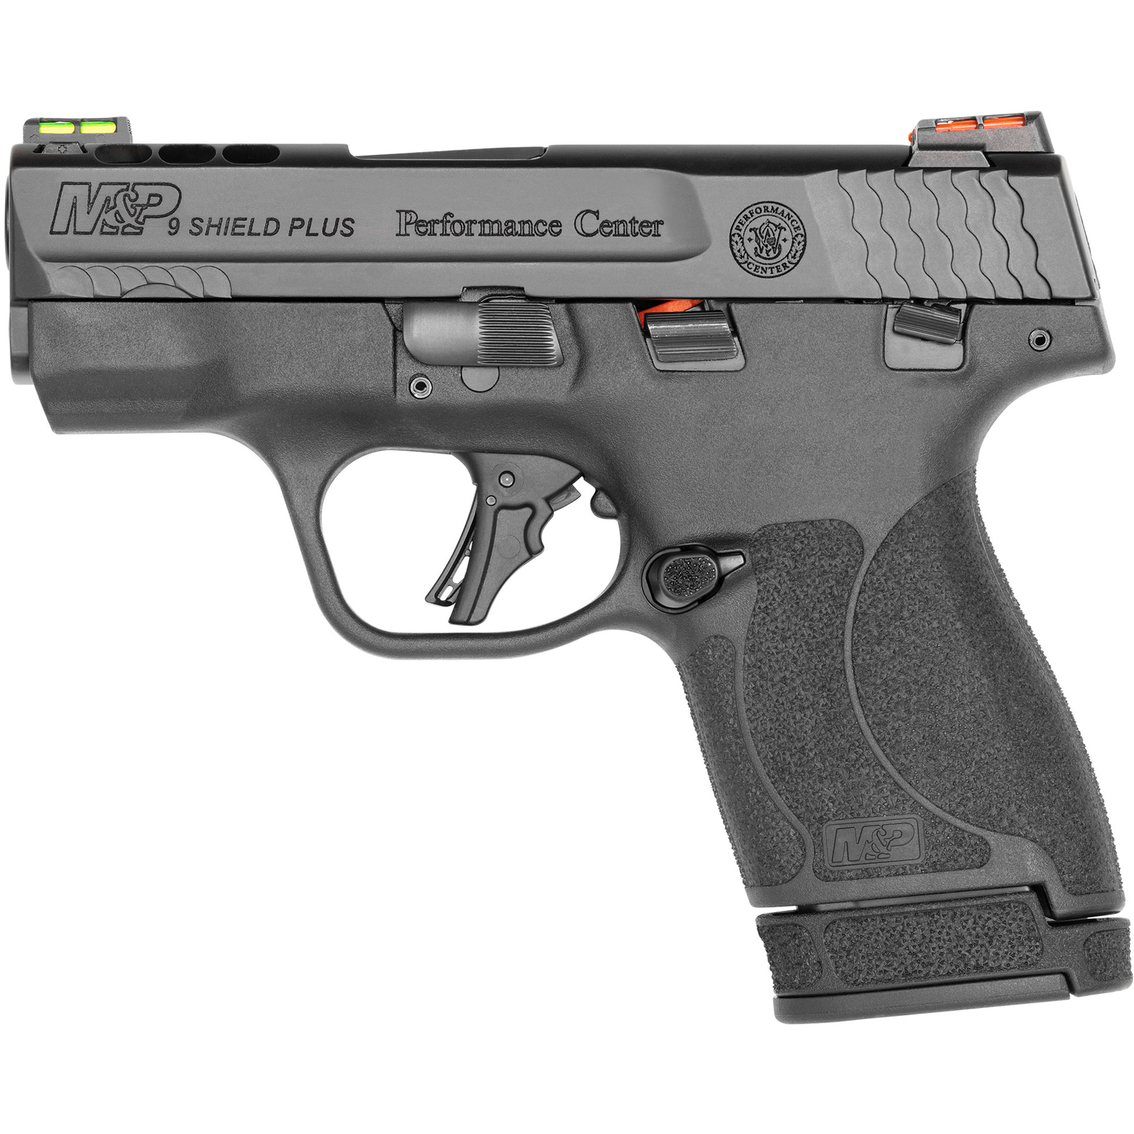 S&W Shield Plus PC 9mm 3.1 in. Ported Barrel with EDC Kit 13 Rnd Pistol Black - Image 2 of 2